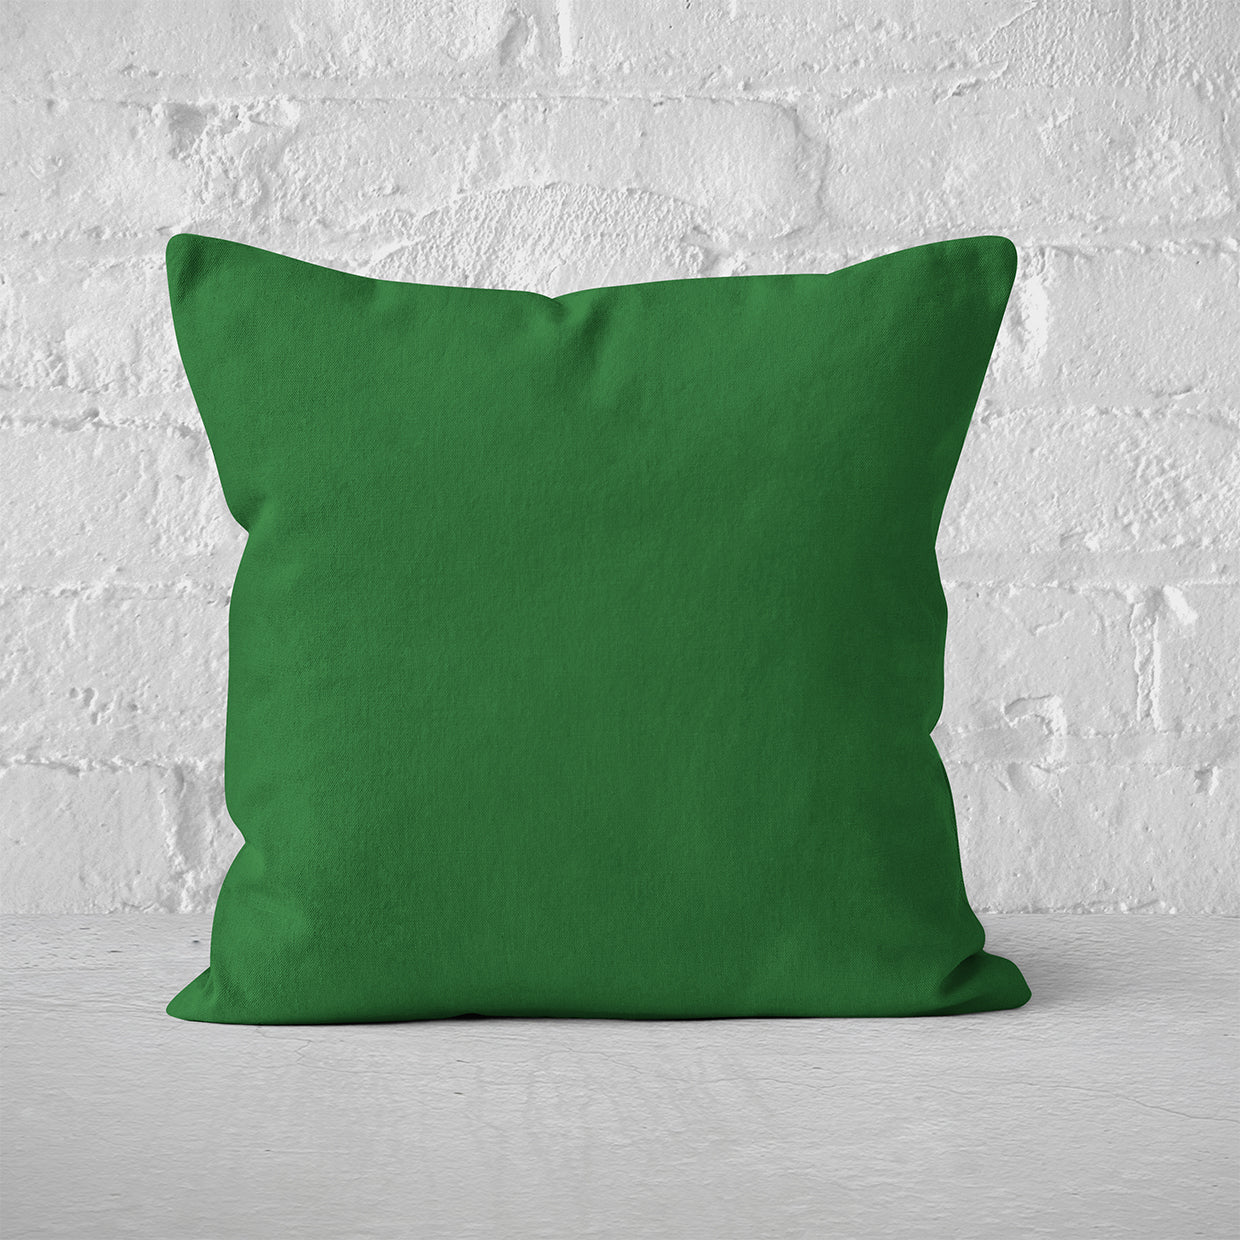 Pillow Cover Art Feature 'Solid' - Green - Cotton Twill